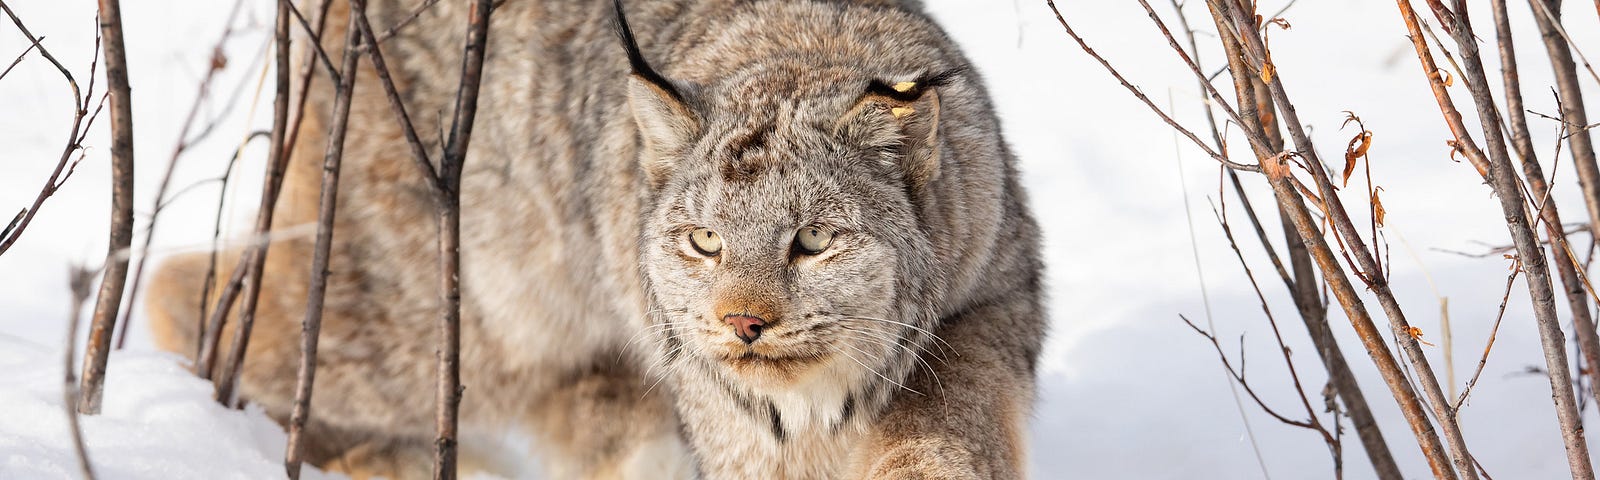 Canada lynx with large paws walking on atop snowy landscape